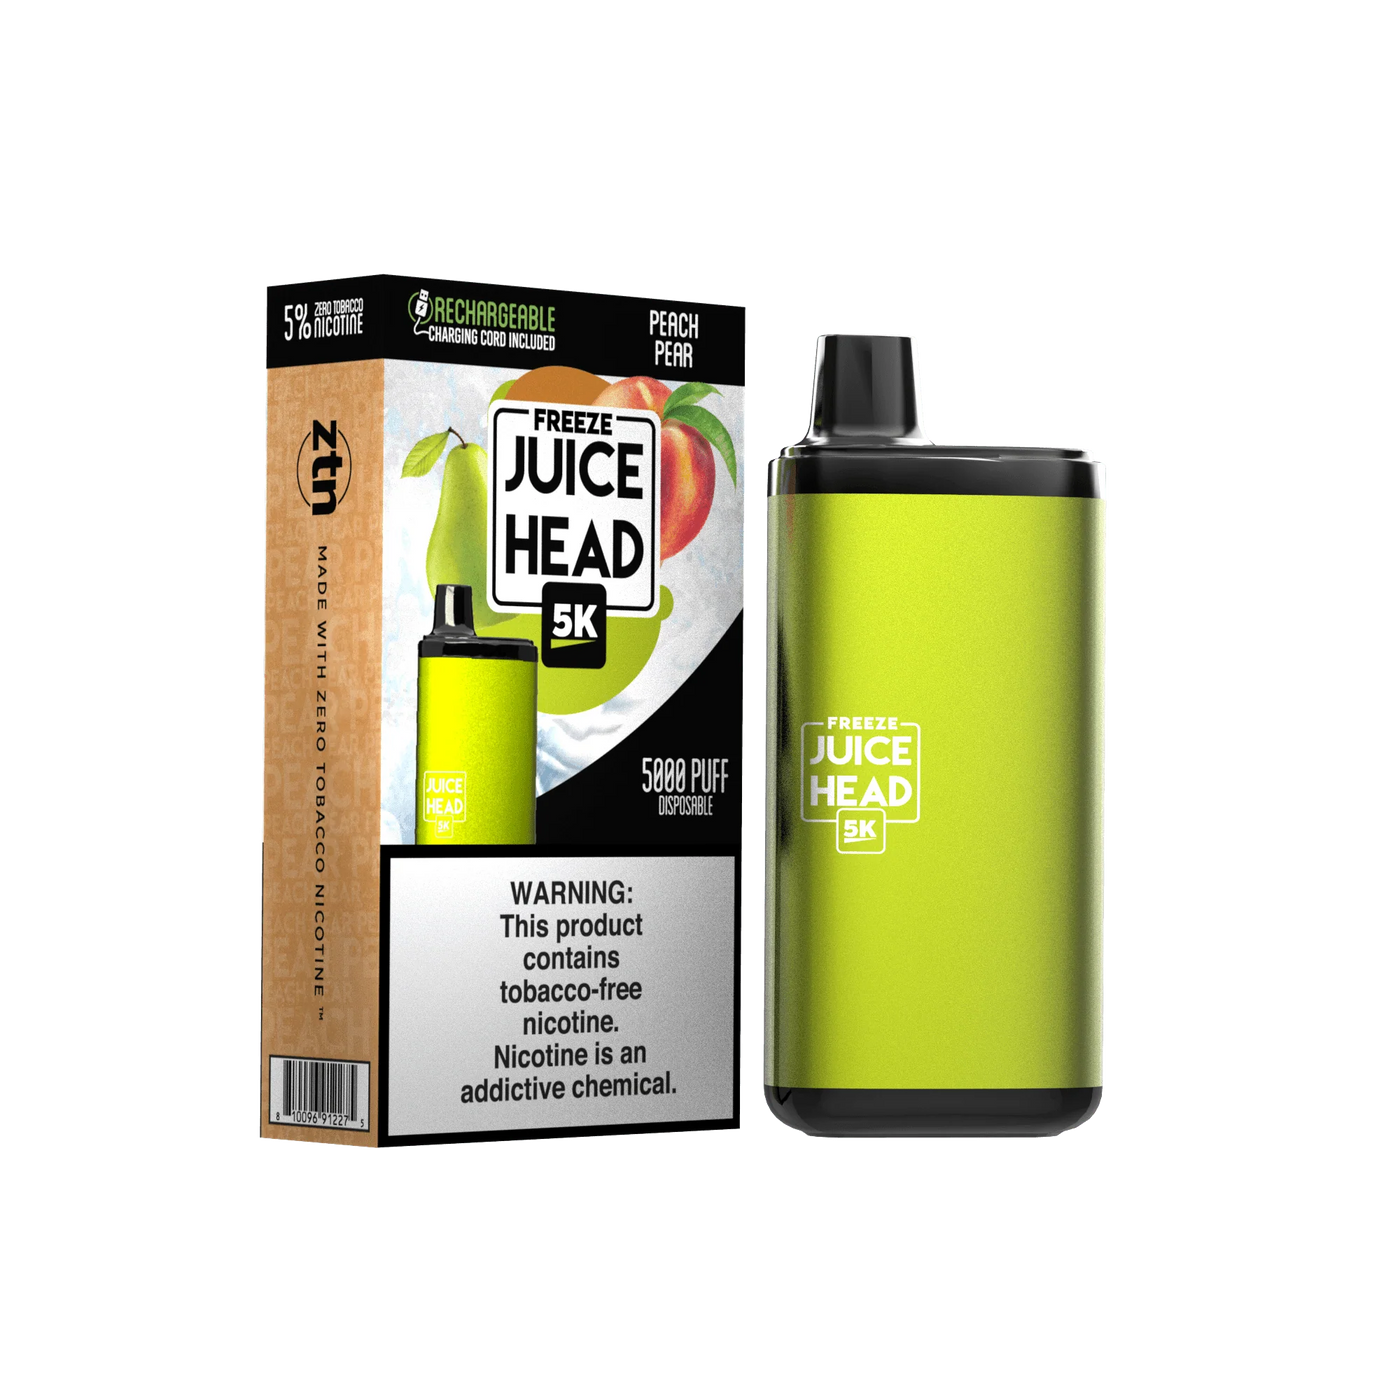 Juice Head 5K Disposable 5000 Puffs